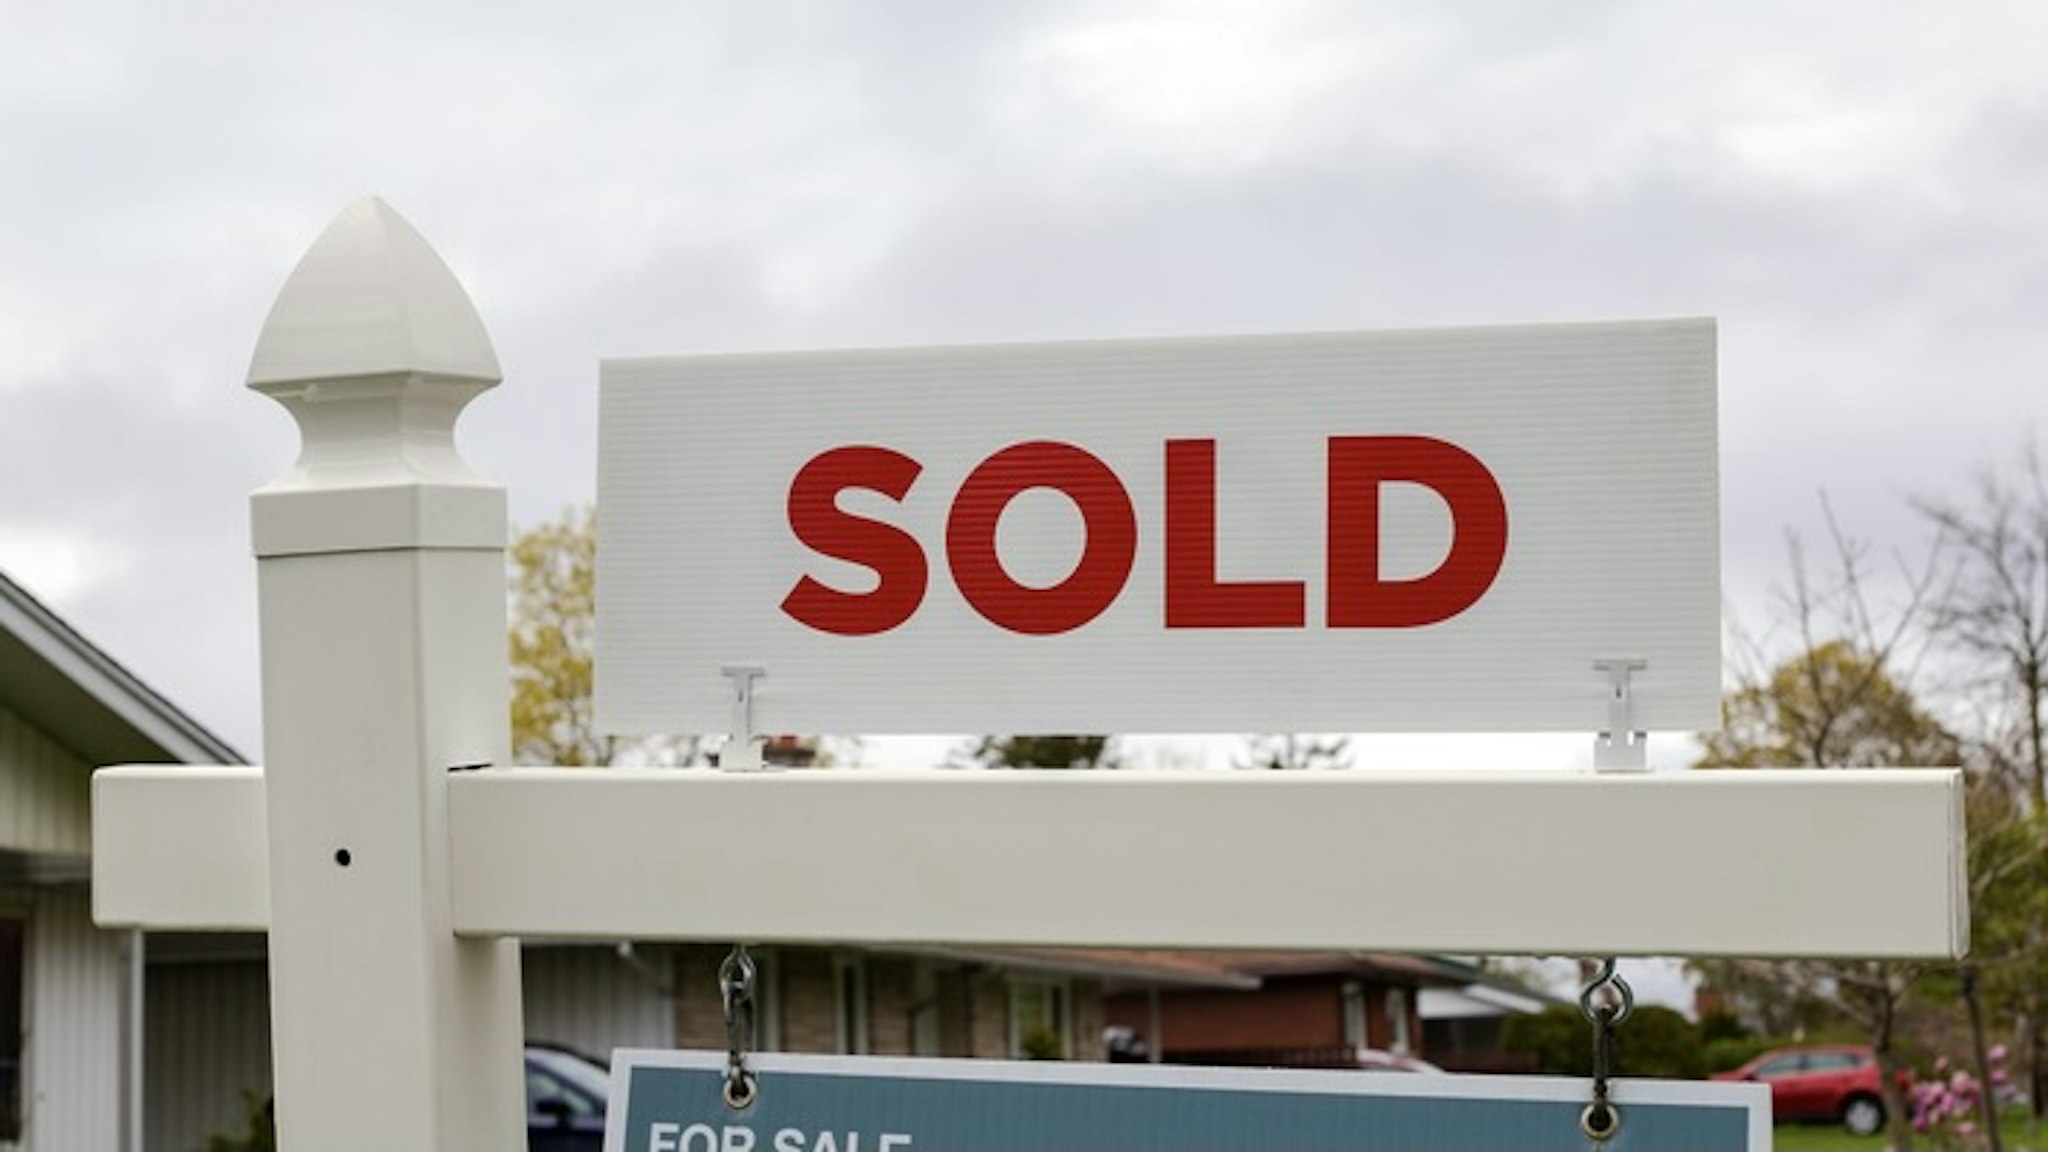 White sold sign in front of a house. Real estate concept - stock photo Sold sign in front of a house in a residential neighborhood Iryna Tolmachova via Getty Images